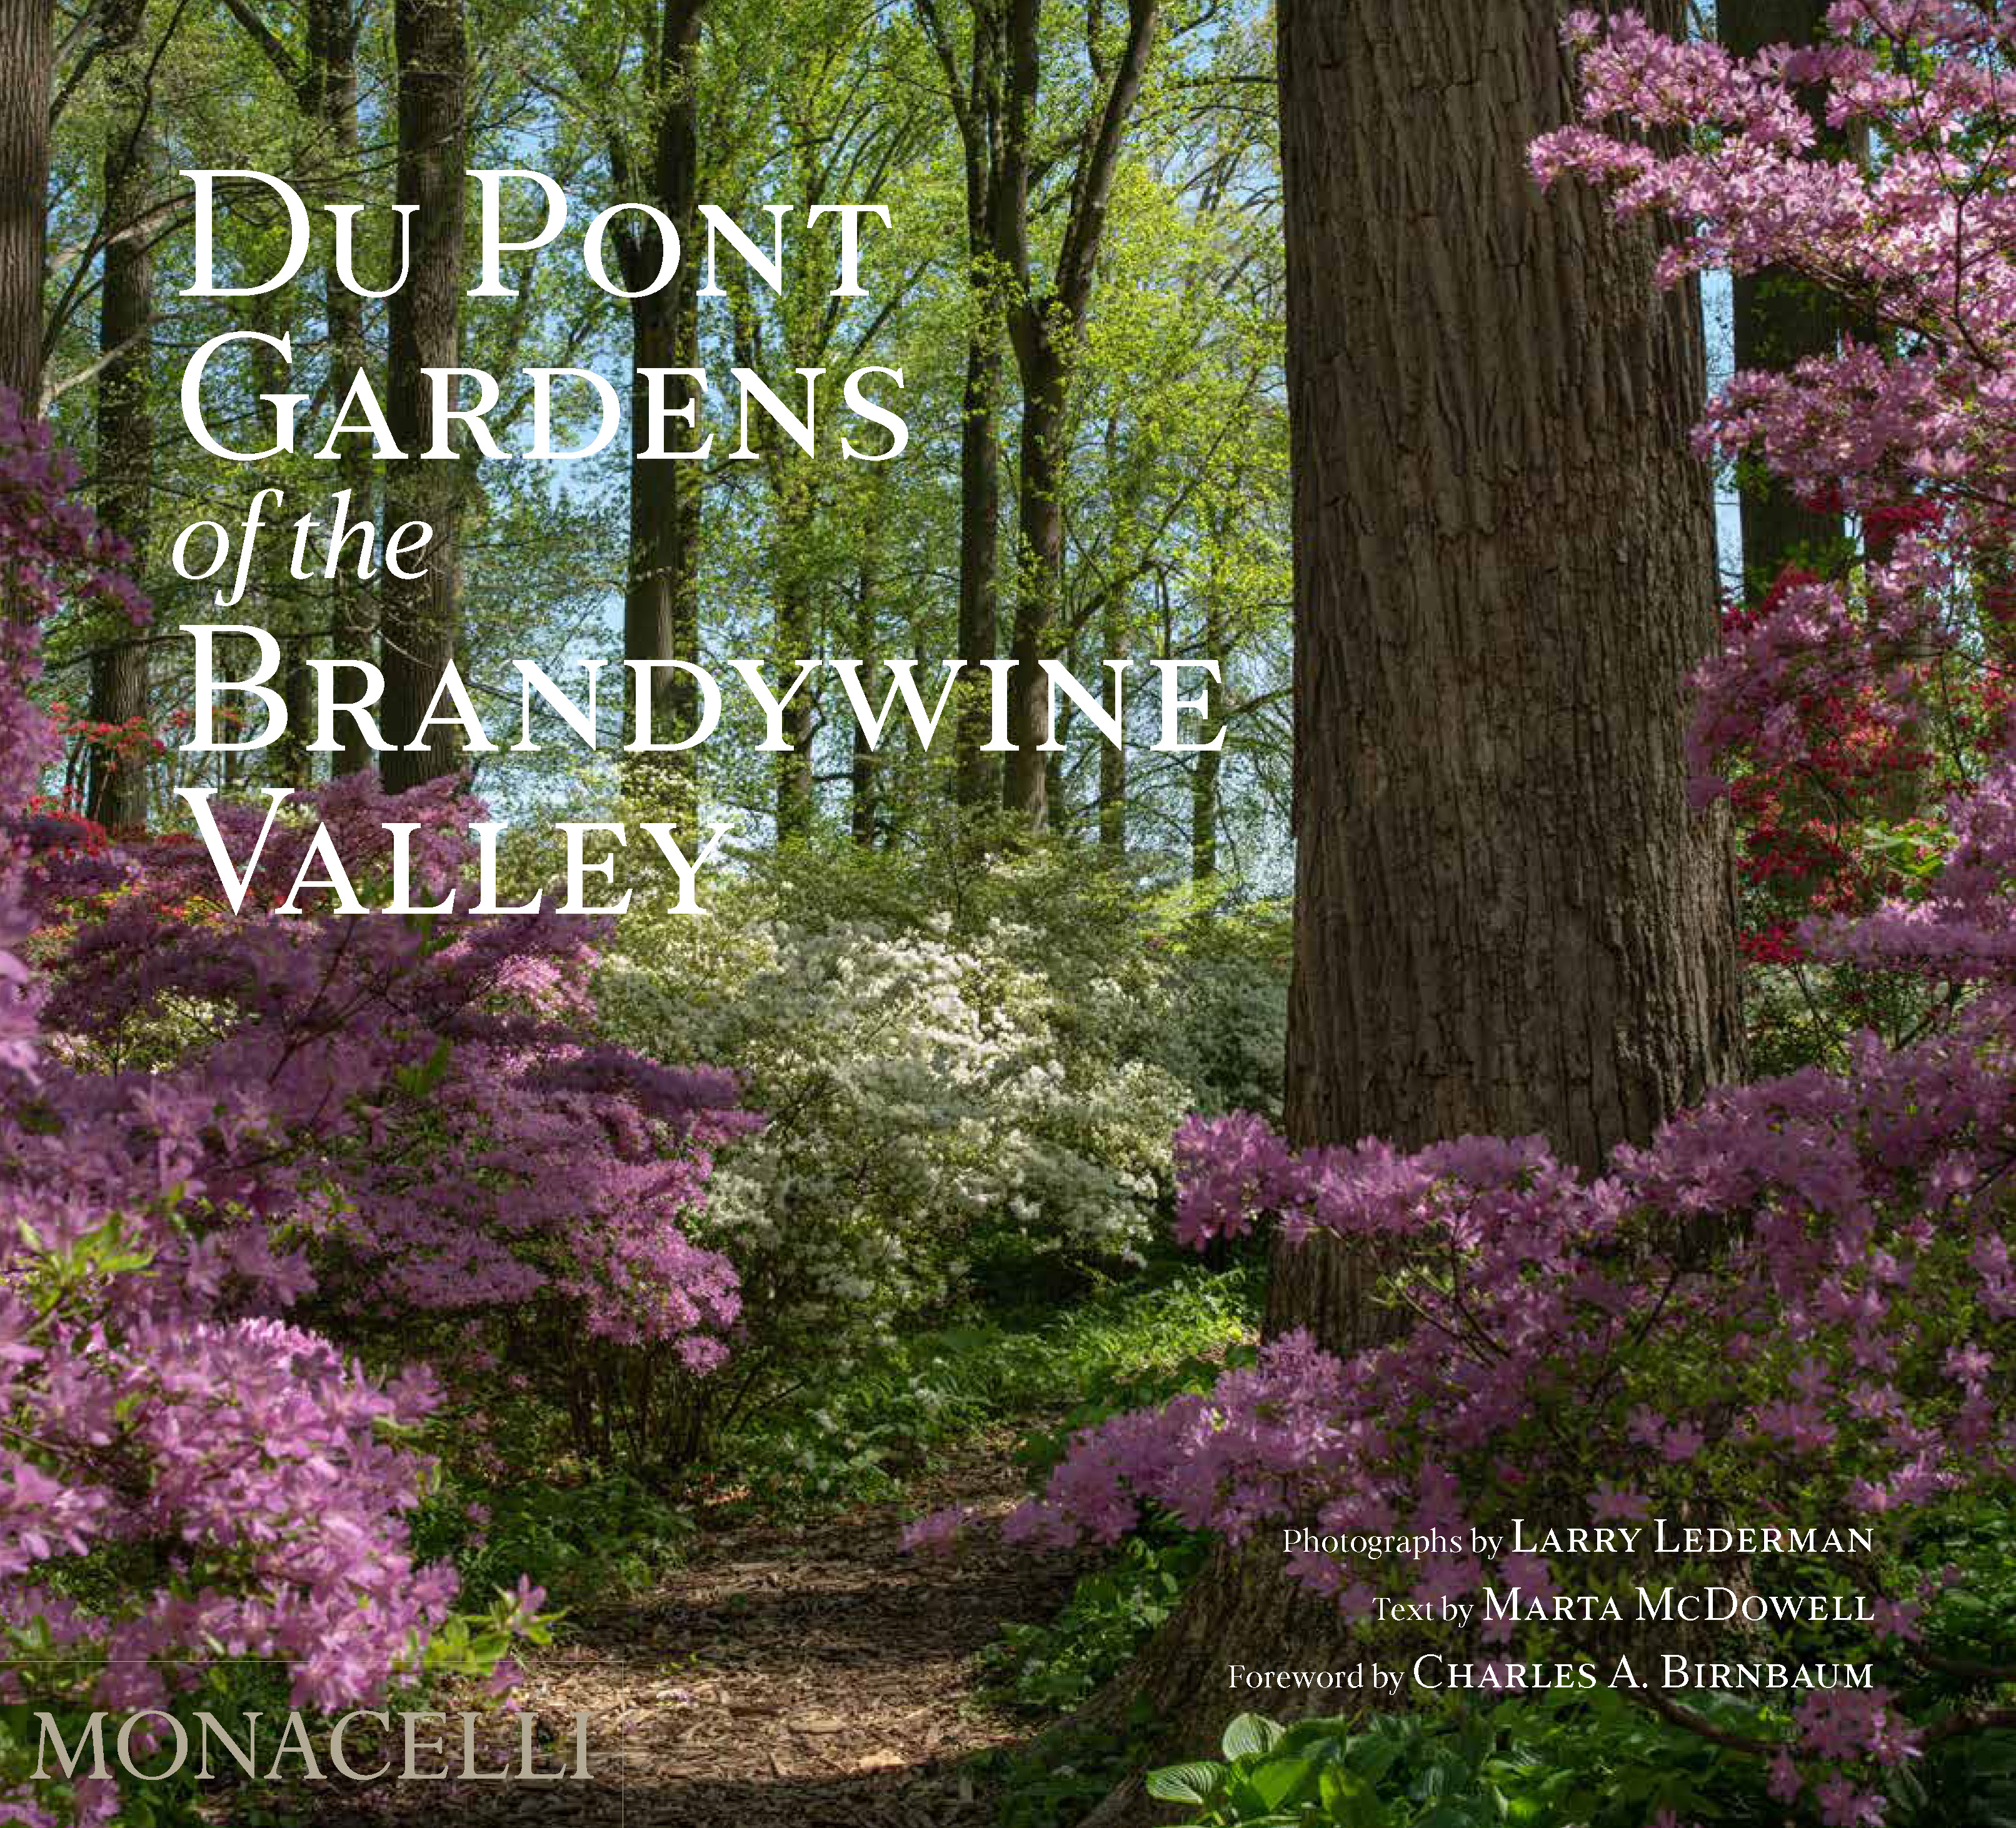 Cover of the book "Du Pont Gardens of the Brandywine Valley."